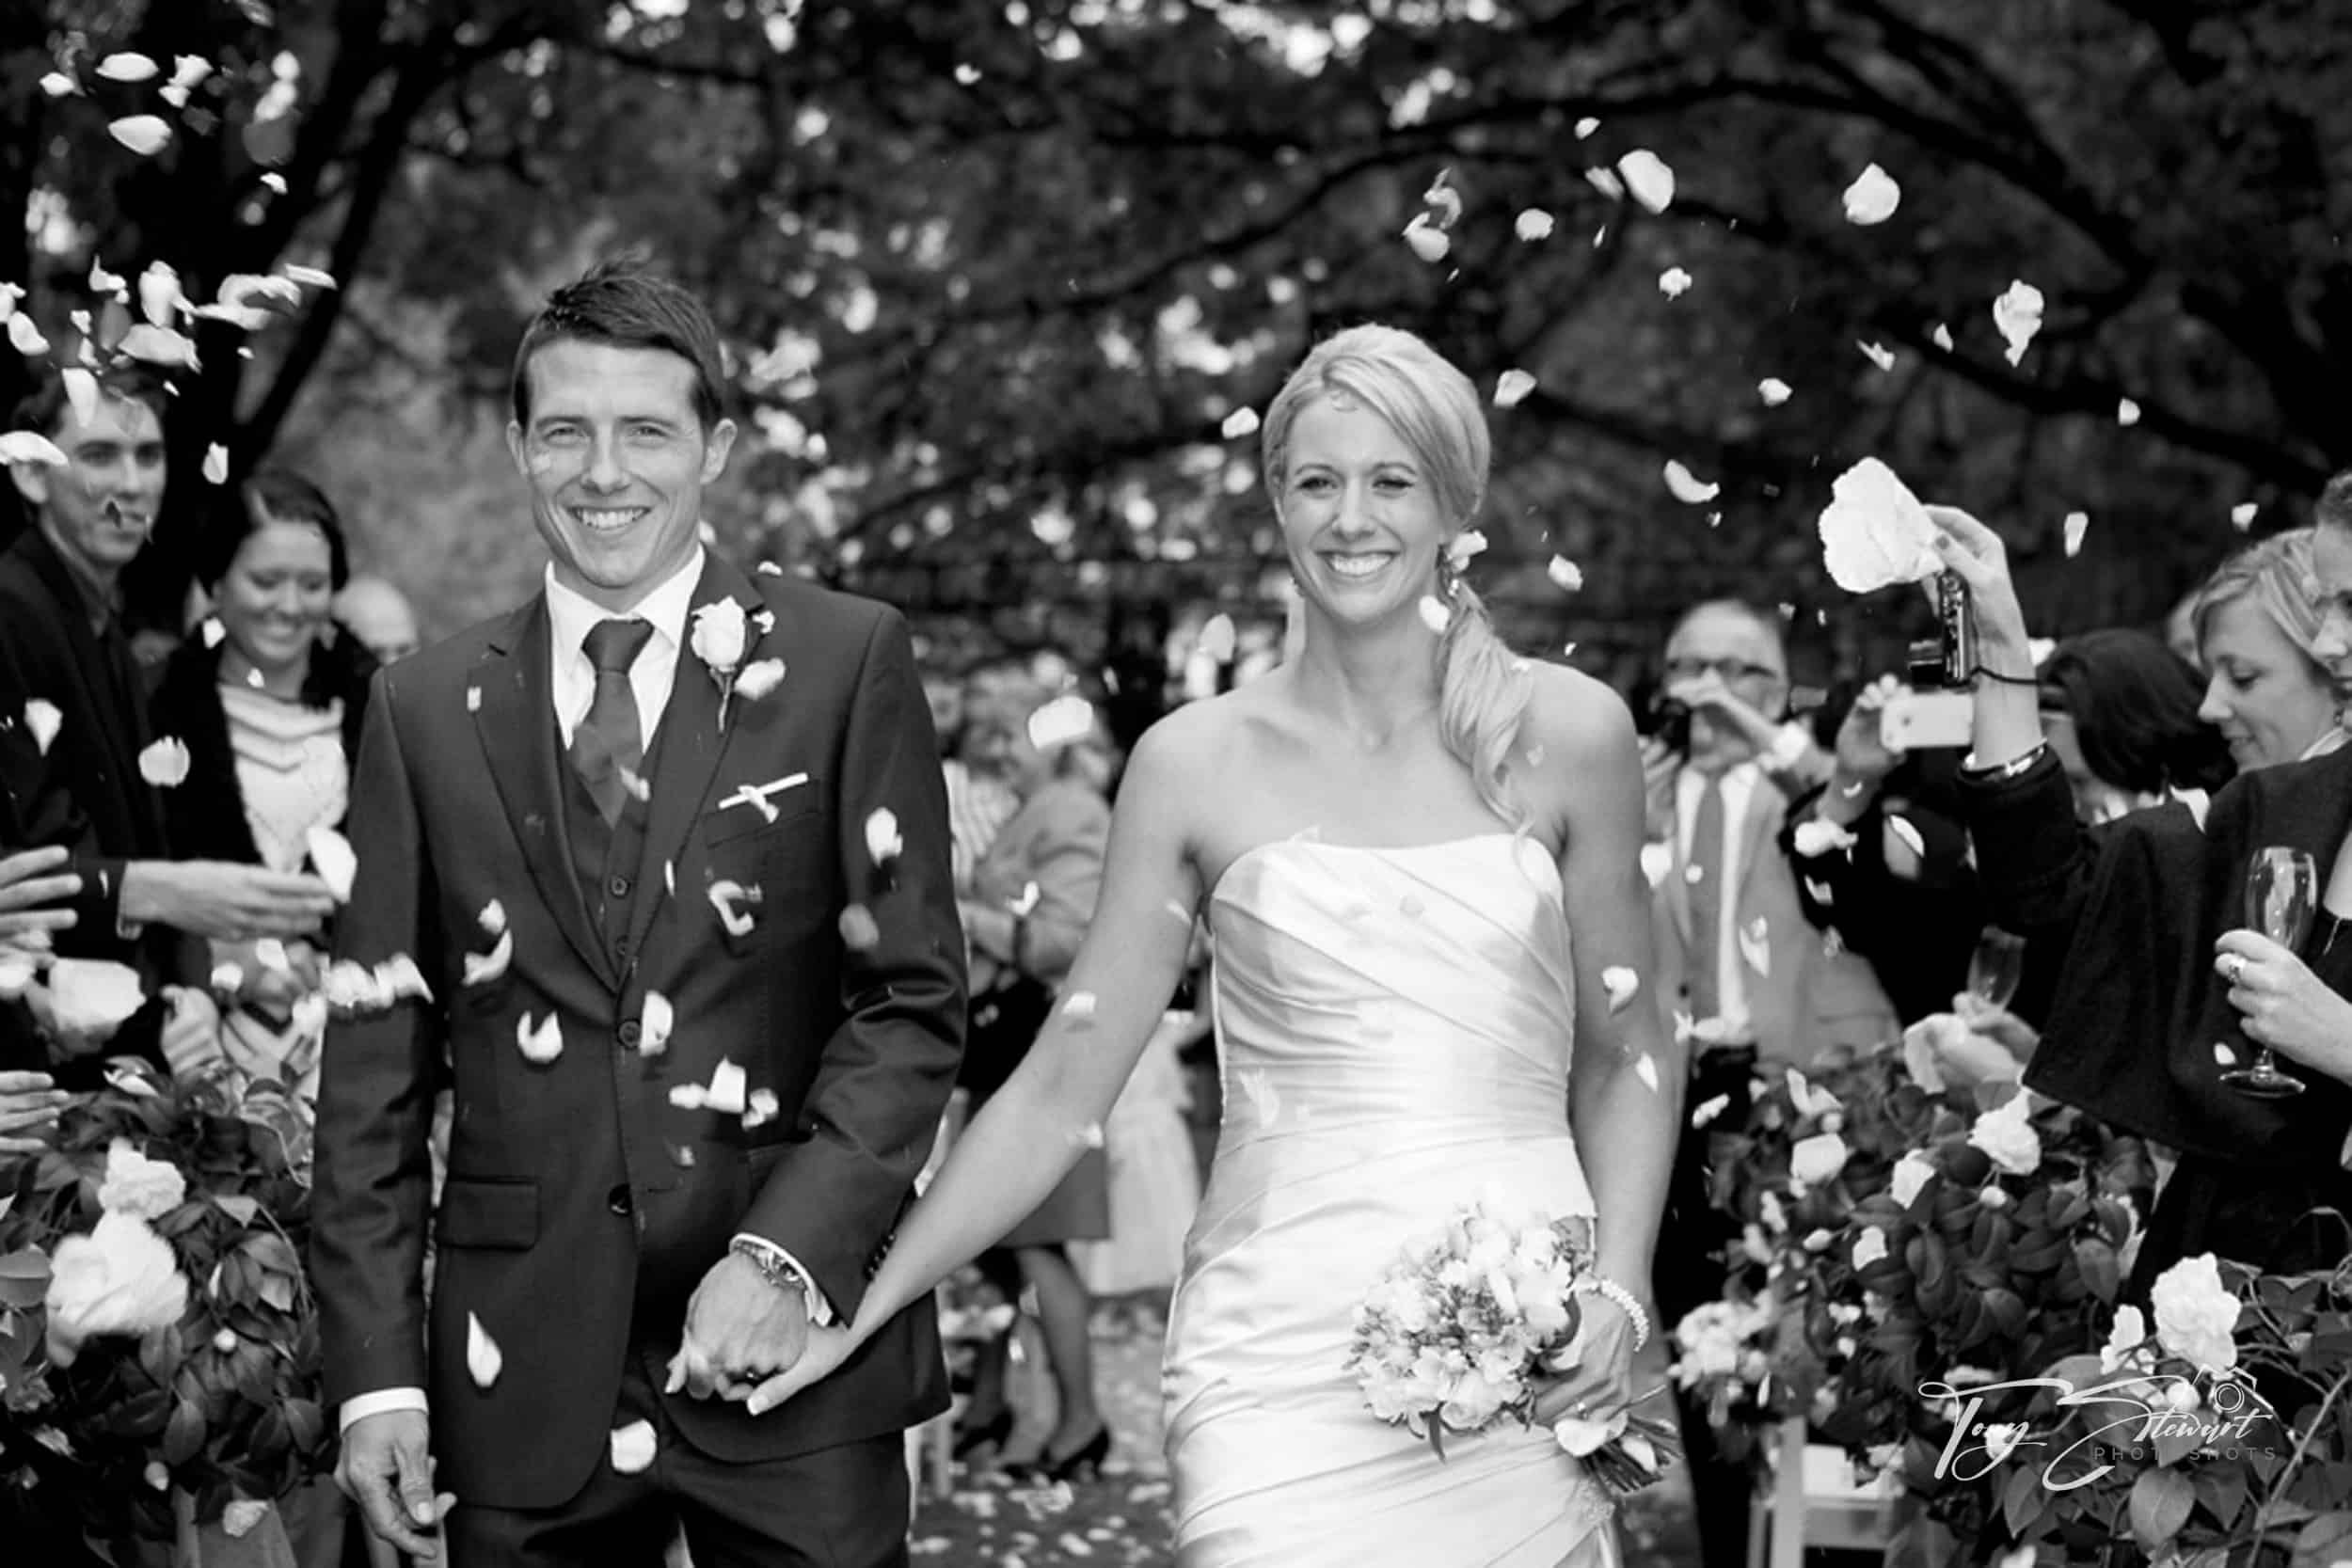 Happy couple leave their wedding ceremony walking down aisle showered with petals.